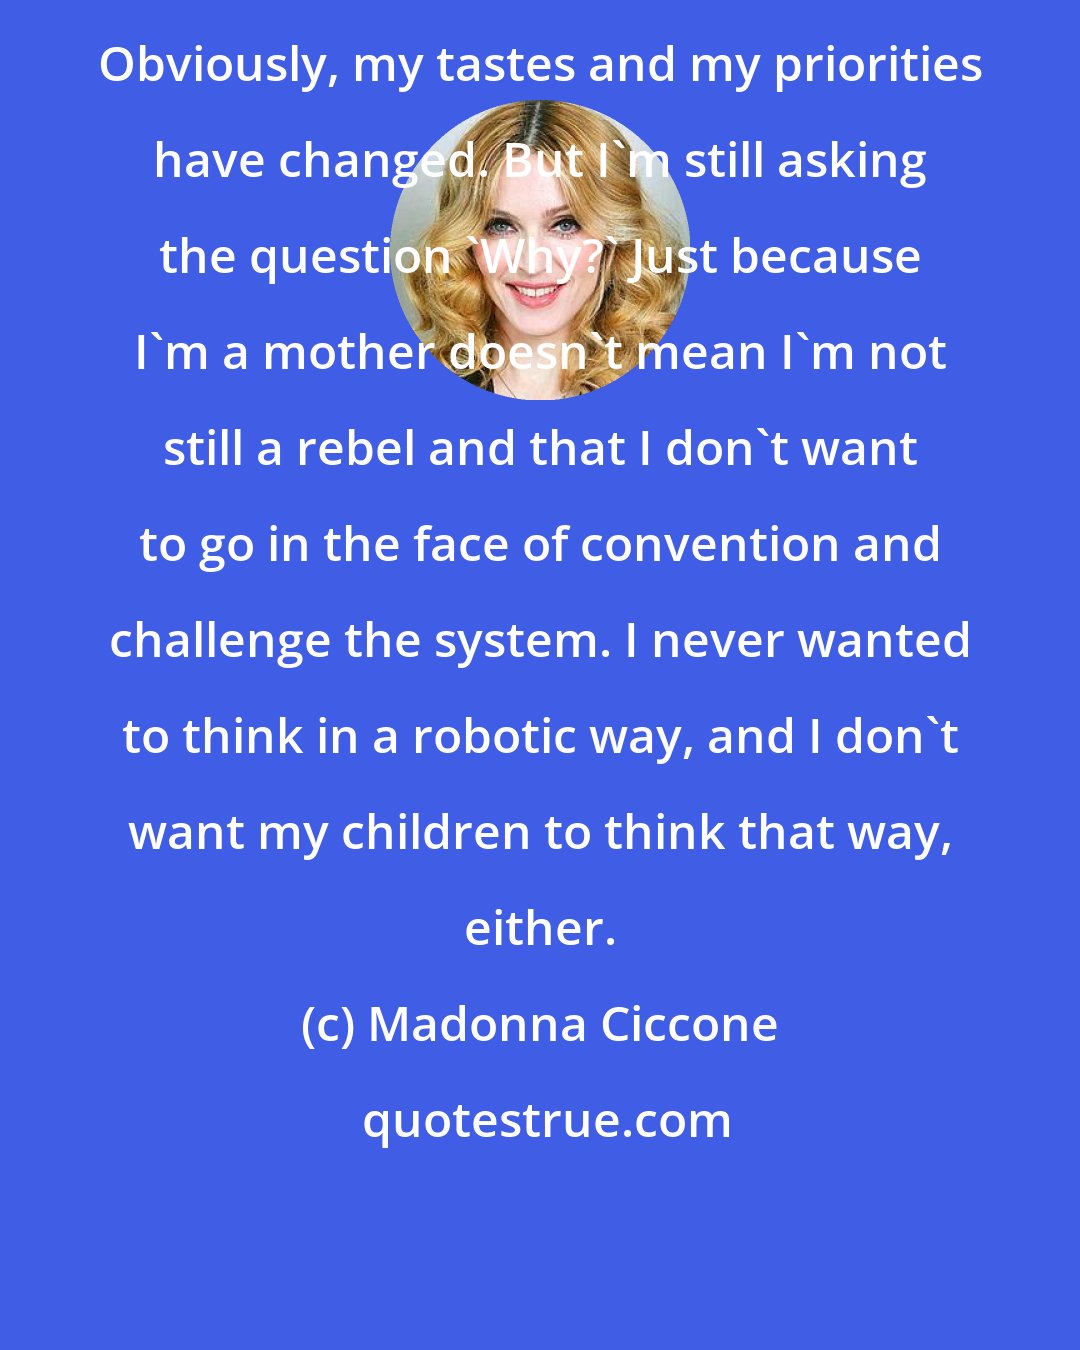 Madonna Ciccone: Obviously, my tastes and my priorities have changed. But I'm still asking the question 'Why?' Just because I'm a mother doesn't mean I'm not still a rebel and that I don't want to go in the face of convention and challenge the system. I never wanted to think in a robotic way, and I don't want my children to think that way, either.